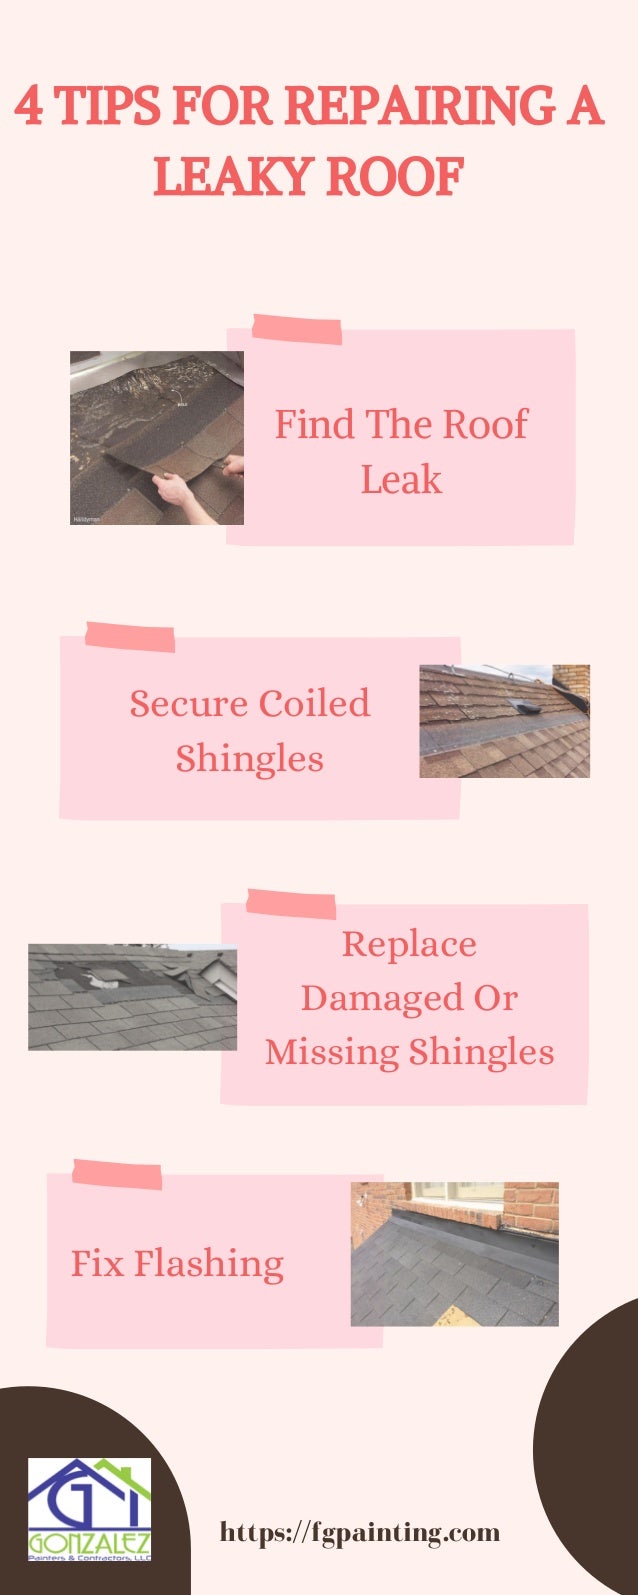 Find The Roof
Leak


Secure Coiled
Shingles


Replace
Damaged Or
Missing Shingles
Fix Flashing
4 TIPS FOR REPAIRING A
LEAKY ROOF
https://fgpainting.com
 